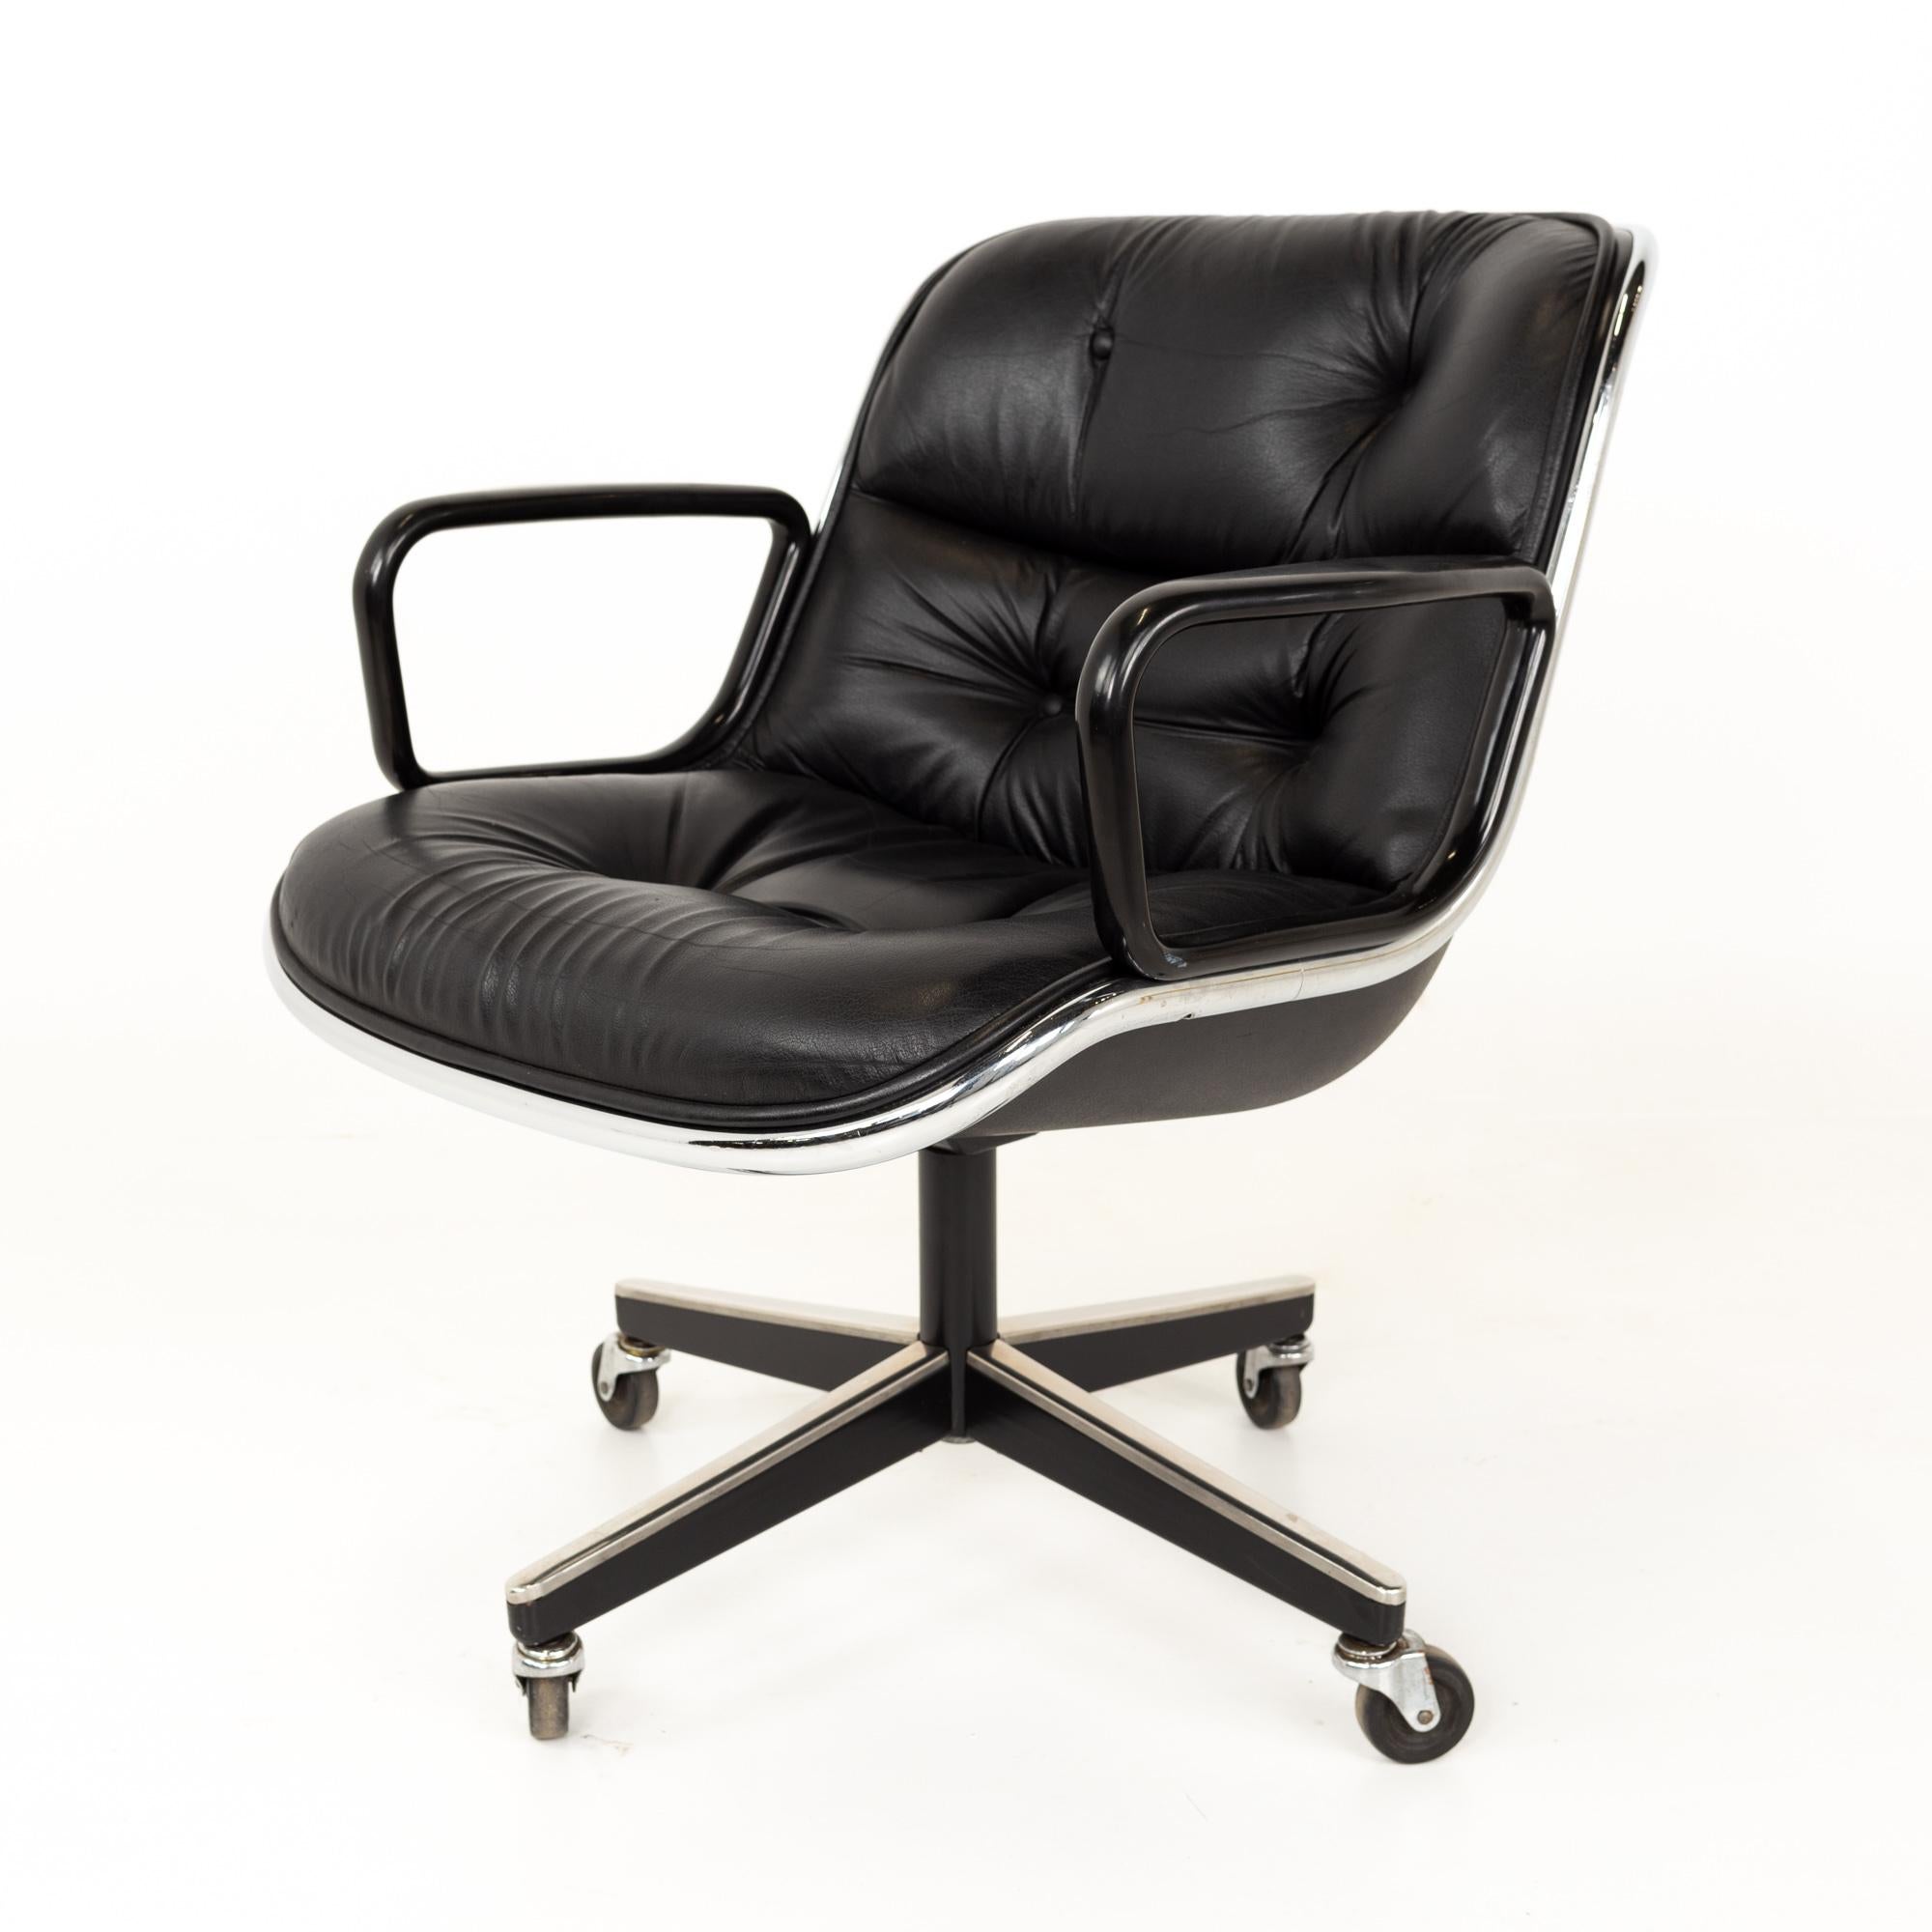 Charles Pollock for Knoll mid century wheeled office desk chair
This chair is 26.5 wide x 28 deep x 31.25 inches high, with a seat height of 18.25 and the arm height of 25.25 inches 

All pieces of furniture can be had in what we call restored